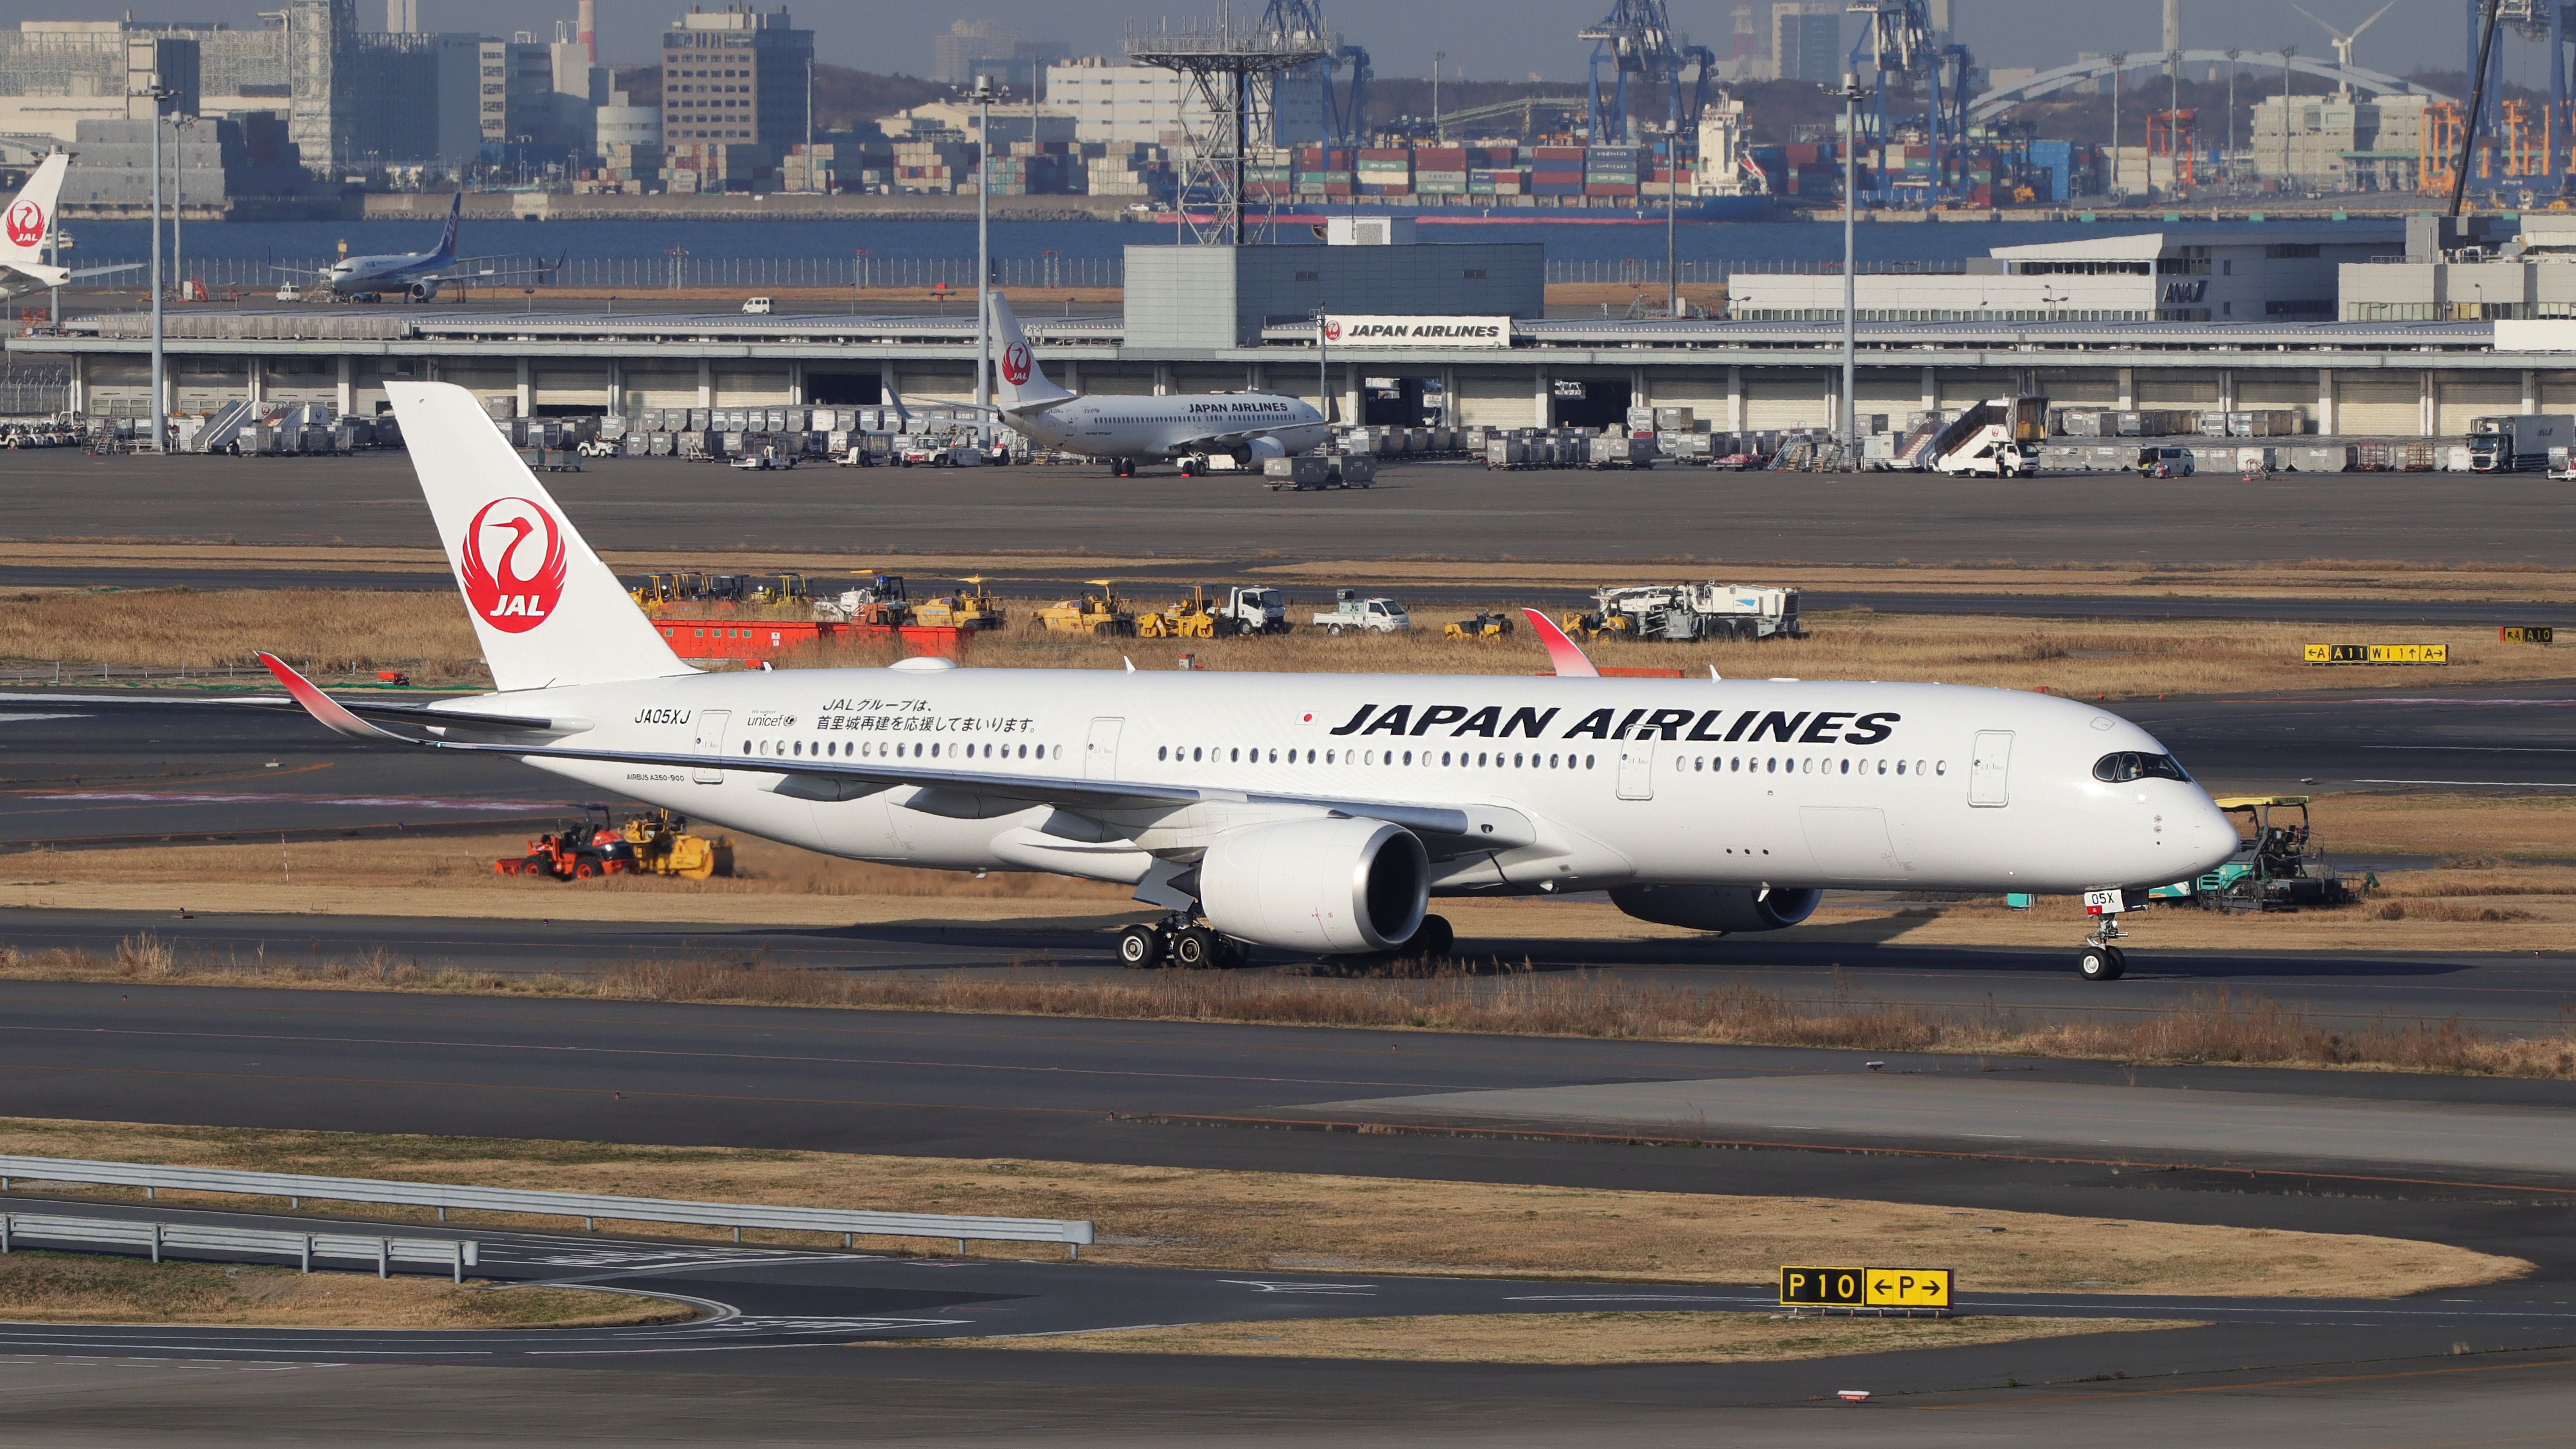 A Japan Airlines Airbus A350-900 on an airport apron.